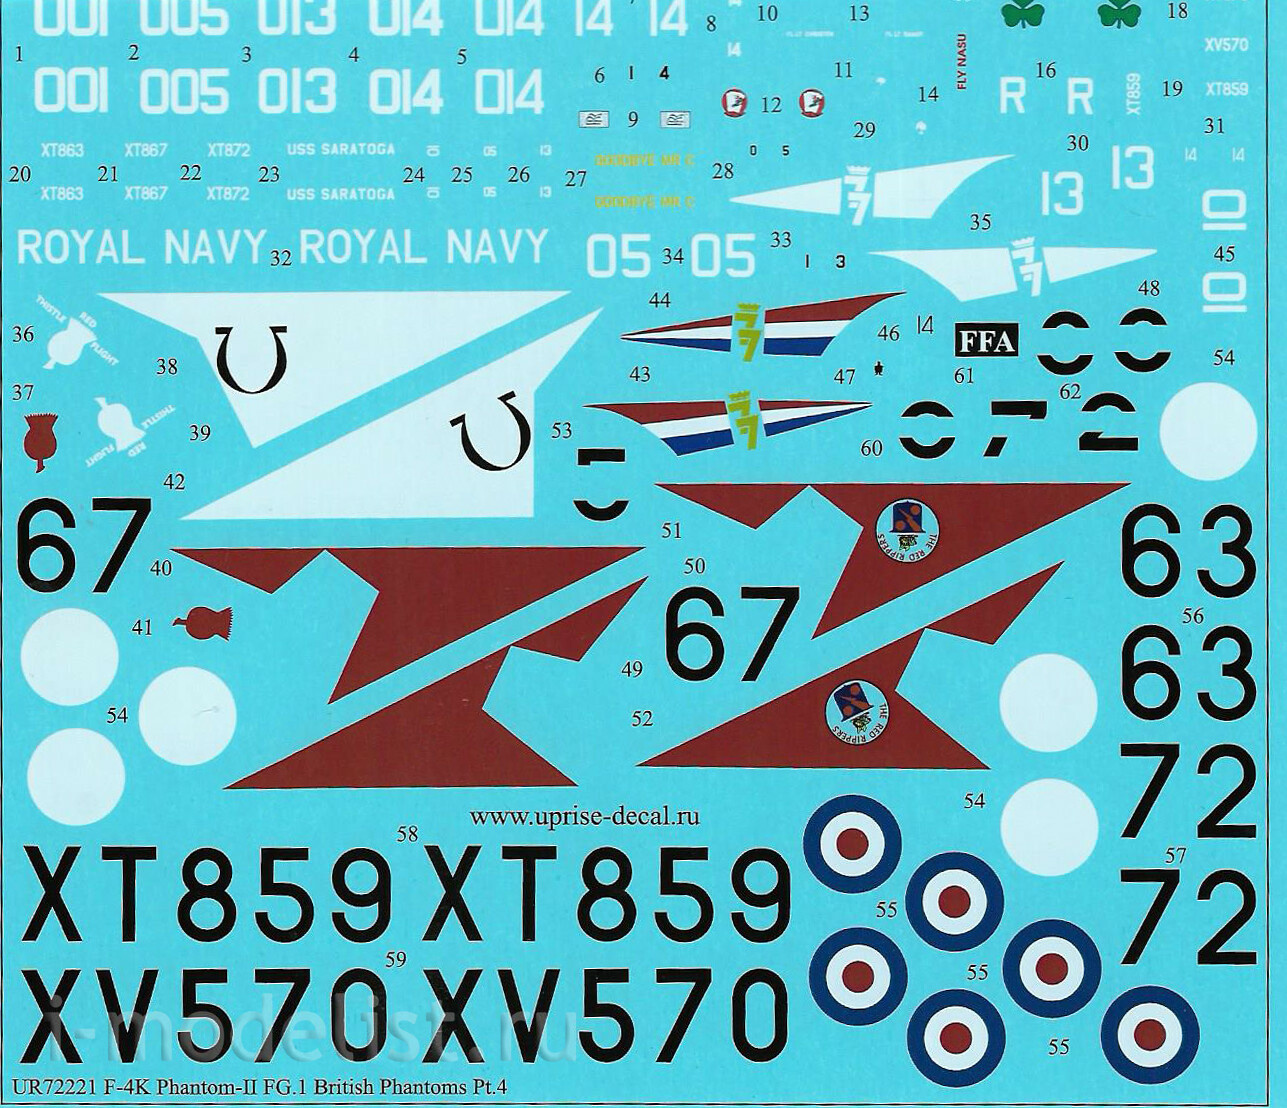 UR72221 SUNRISE 1/72 Decals for F-4K Phantom-II FG.1, British Phantoms Pt.4, FFA (removable lacquer substrate)